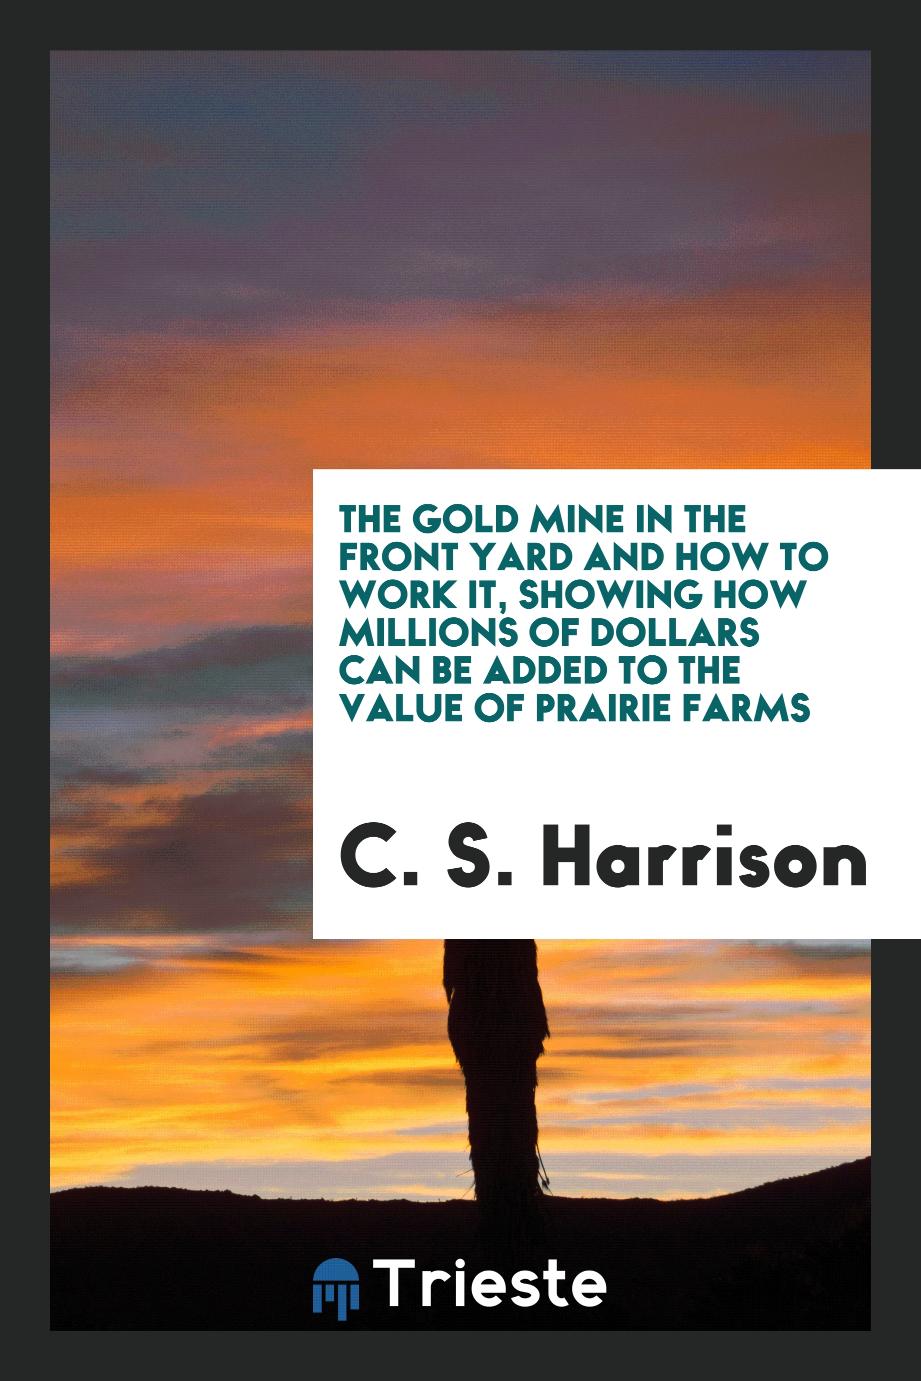 The gold mine in the front yard and how to work it, showing how millions of dollars can be added to the value of prairie farms